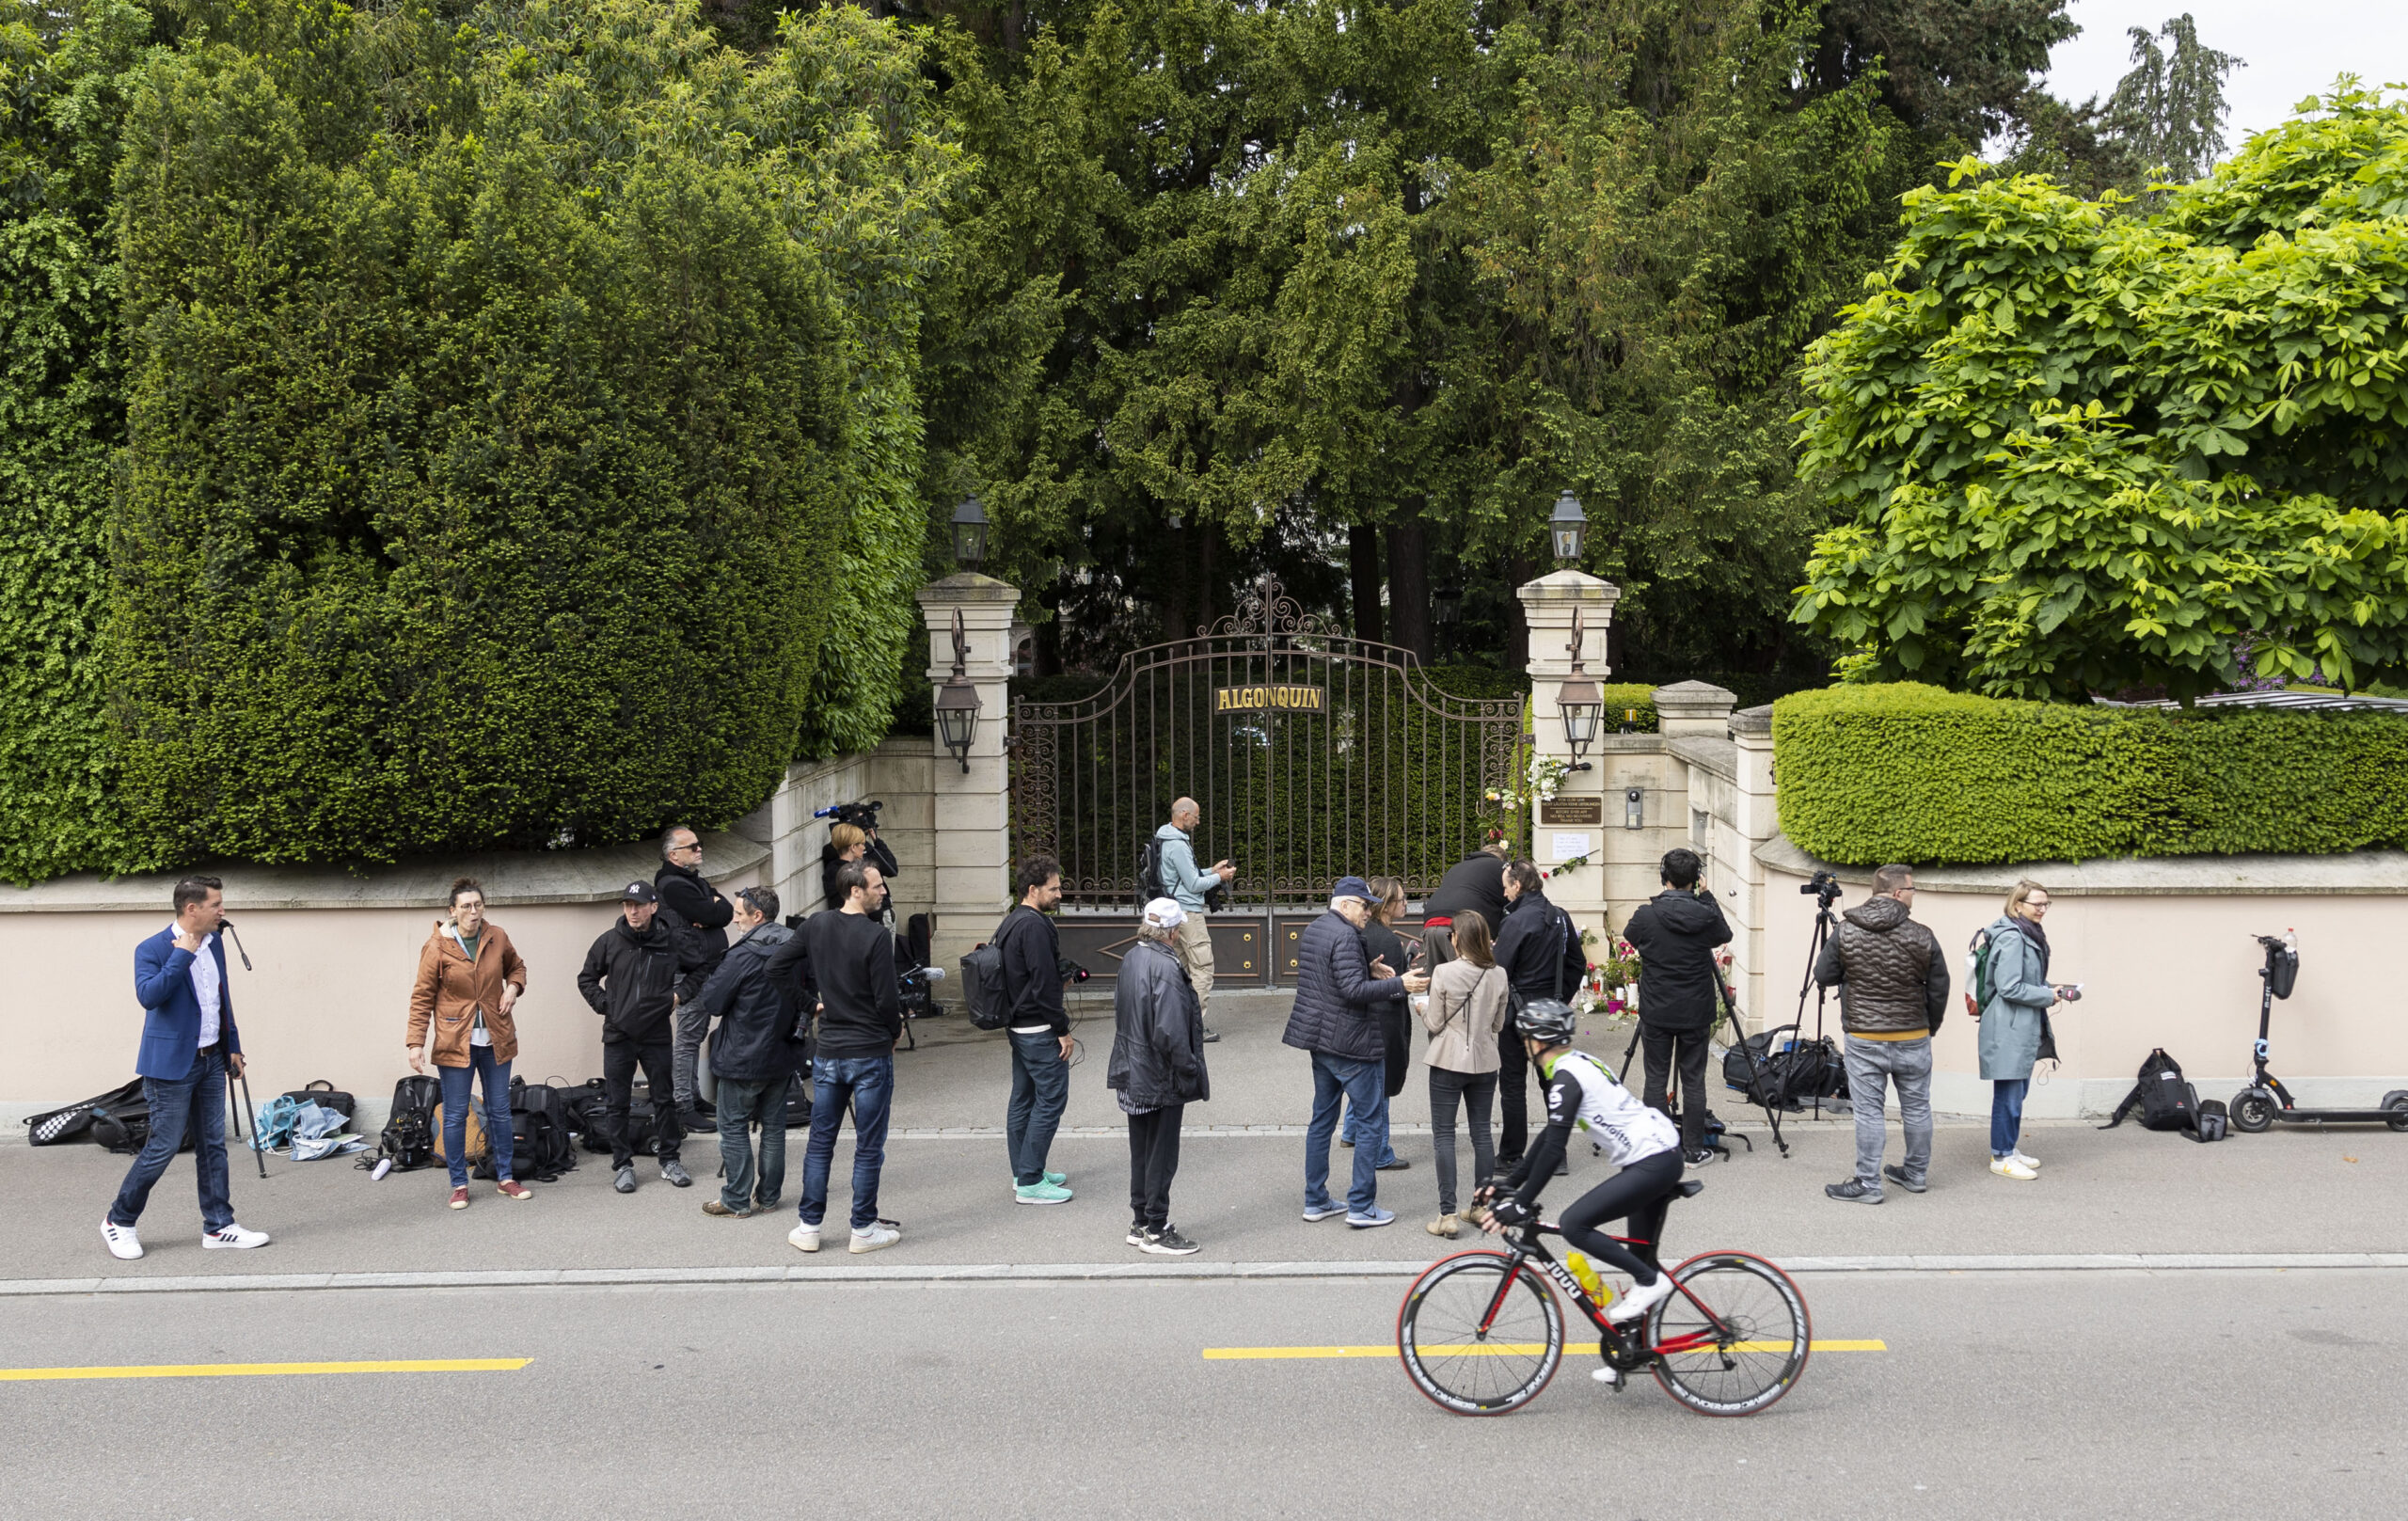 Media gather at the gate of the house of late singer and stage performer Tina Turner in Kuesnacht, Switzerland, on Thursday, May 25, 2023. Turner, the unstoppable singer and stage performer, died Wednesday, after a long illness at her home in Kuesnacht near Zurich, Switzerland, according to her manager. She was 83. Photo credit: Arnd Wiegmann, the Associated Press